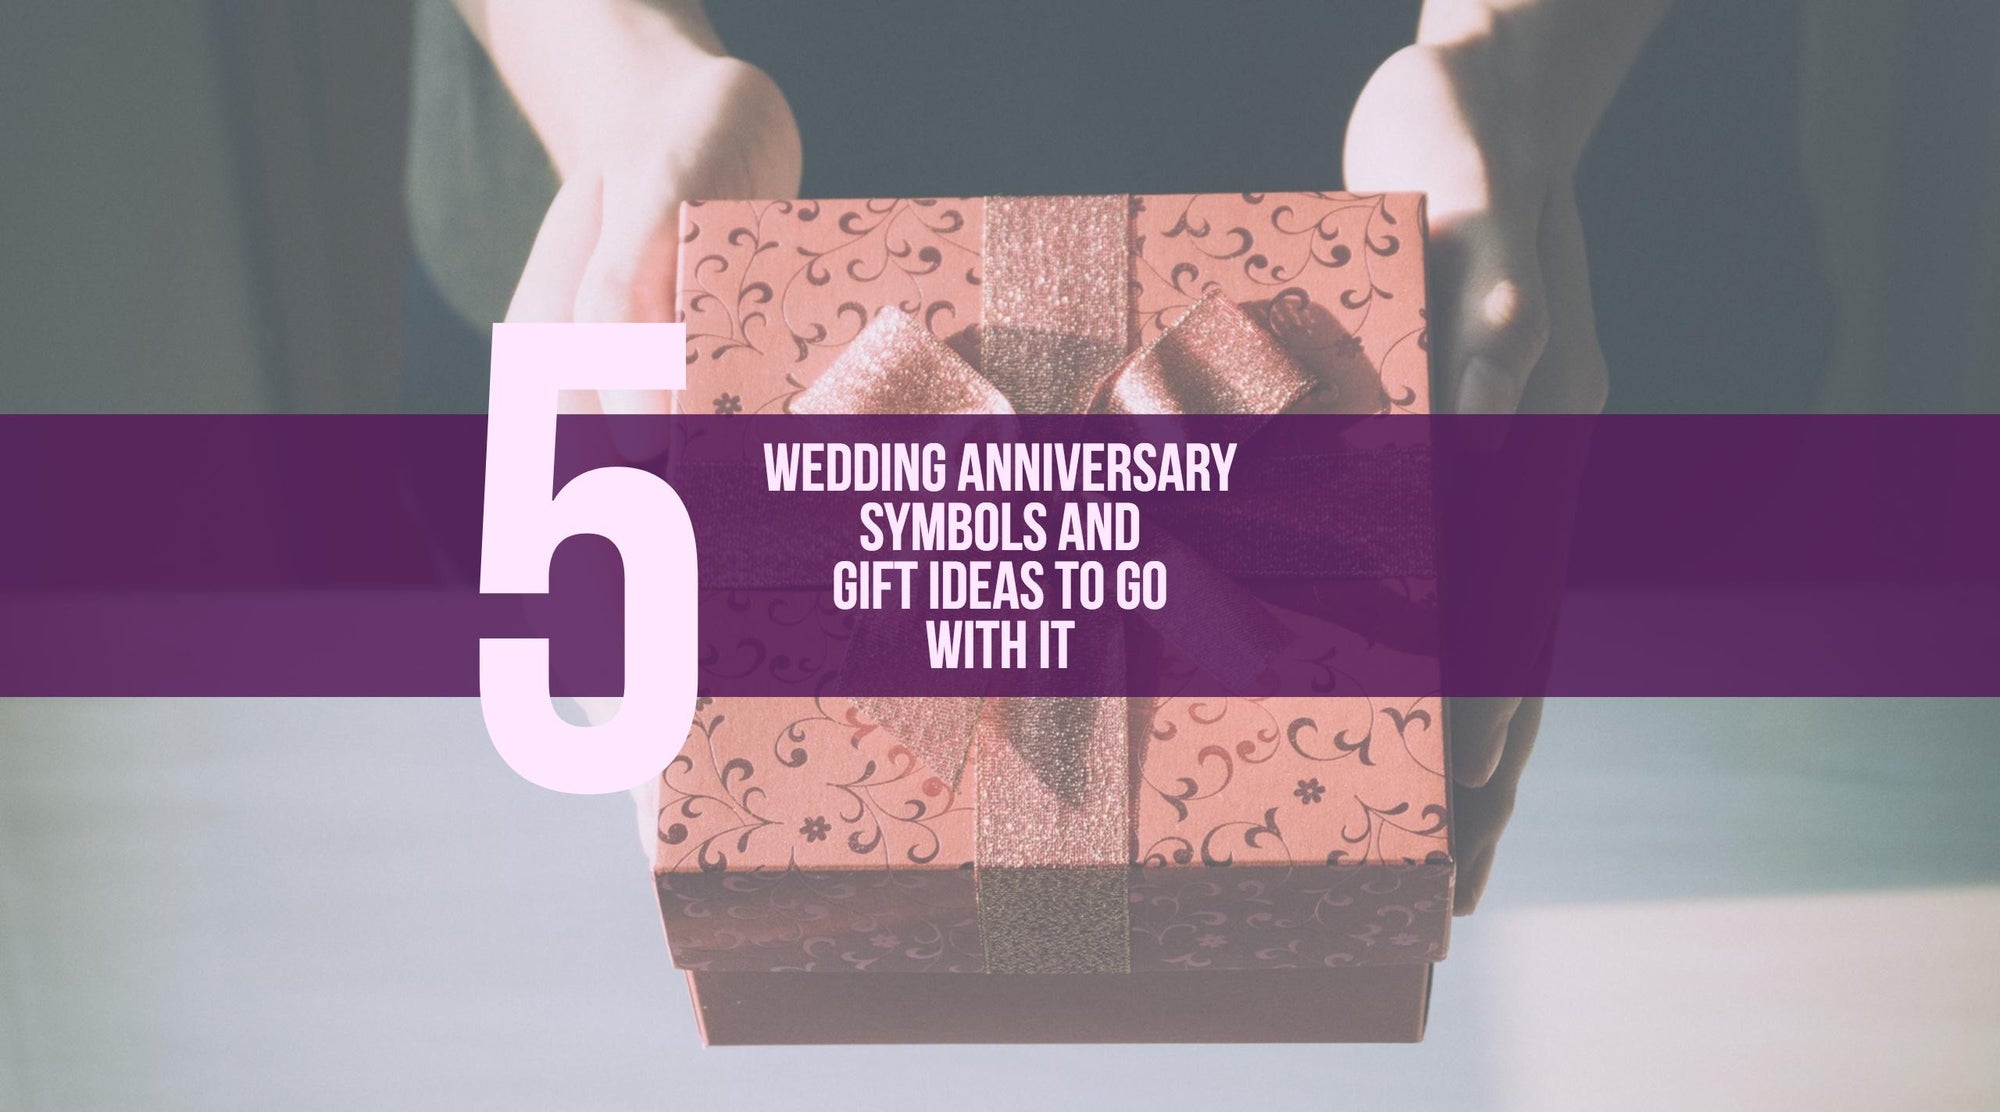 5 Wedding Anniversary Symbols and Gift Ideas to Go with It